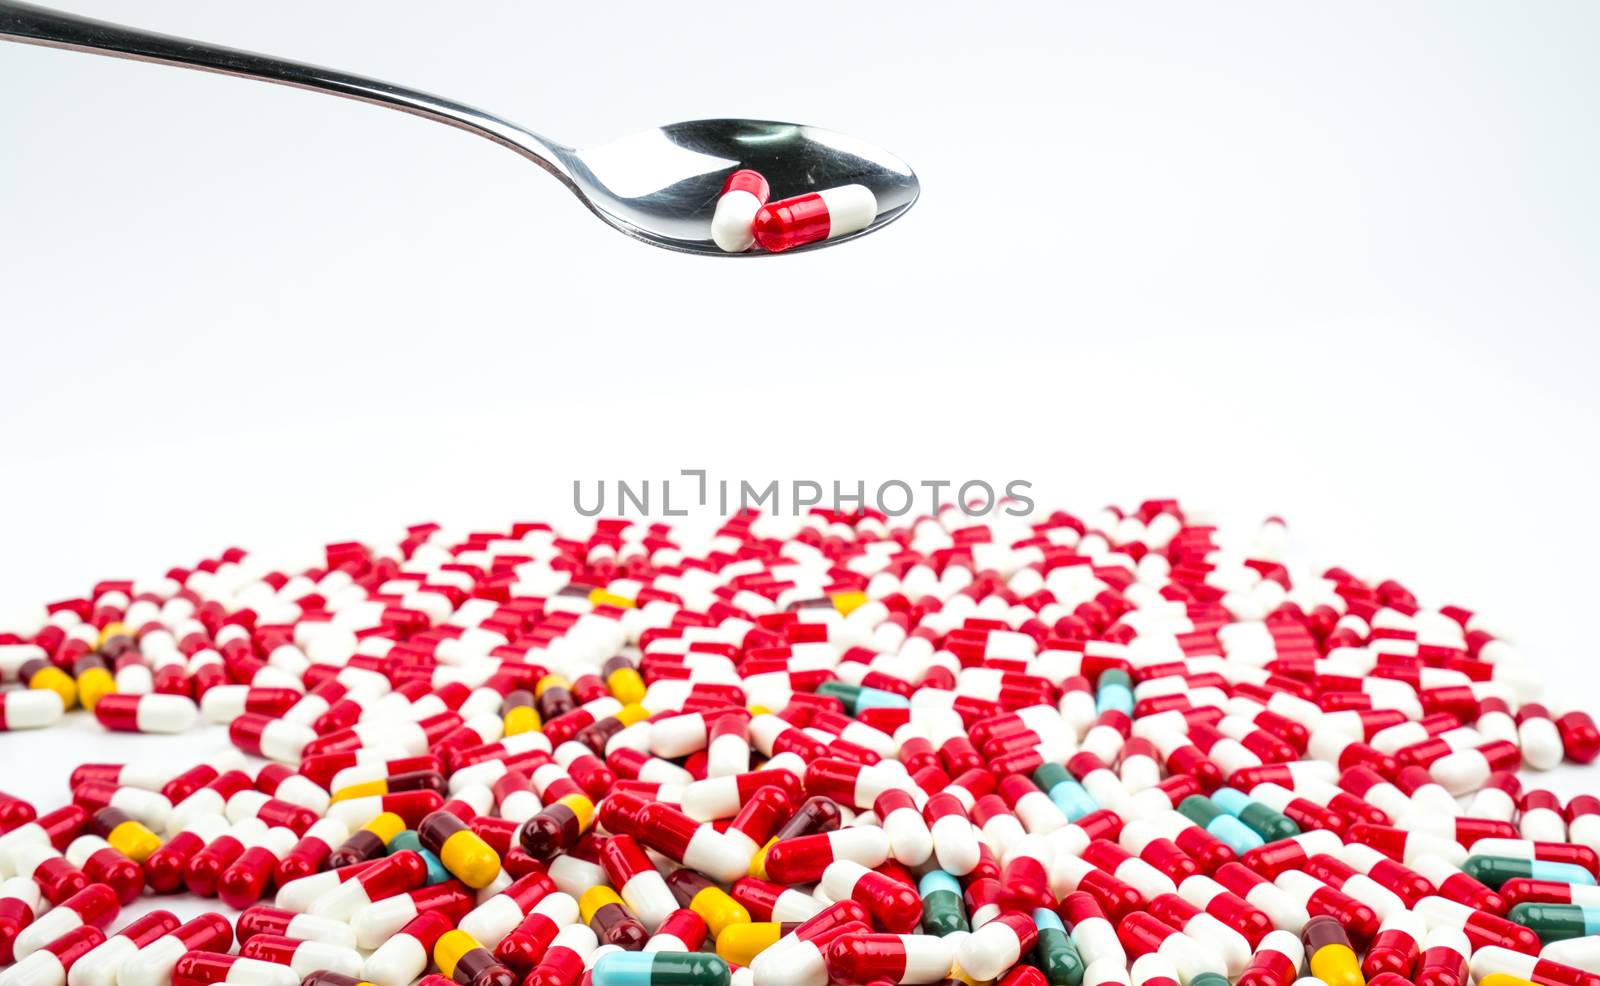 Antibiotic capsules pills in stainless steel spoon on white background with copy space. Drug resistance concept. Antibiotics drug use with reasonable and global healthcare concept. Pharmacy background.